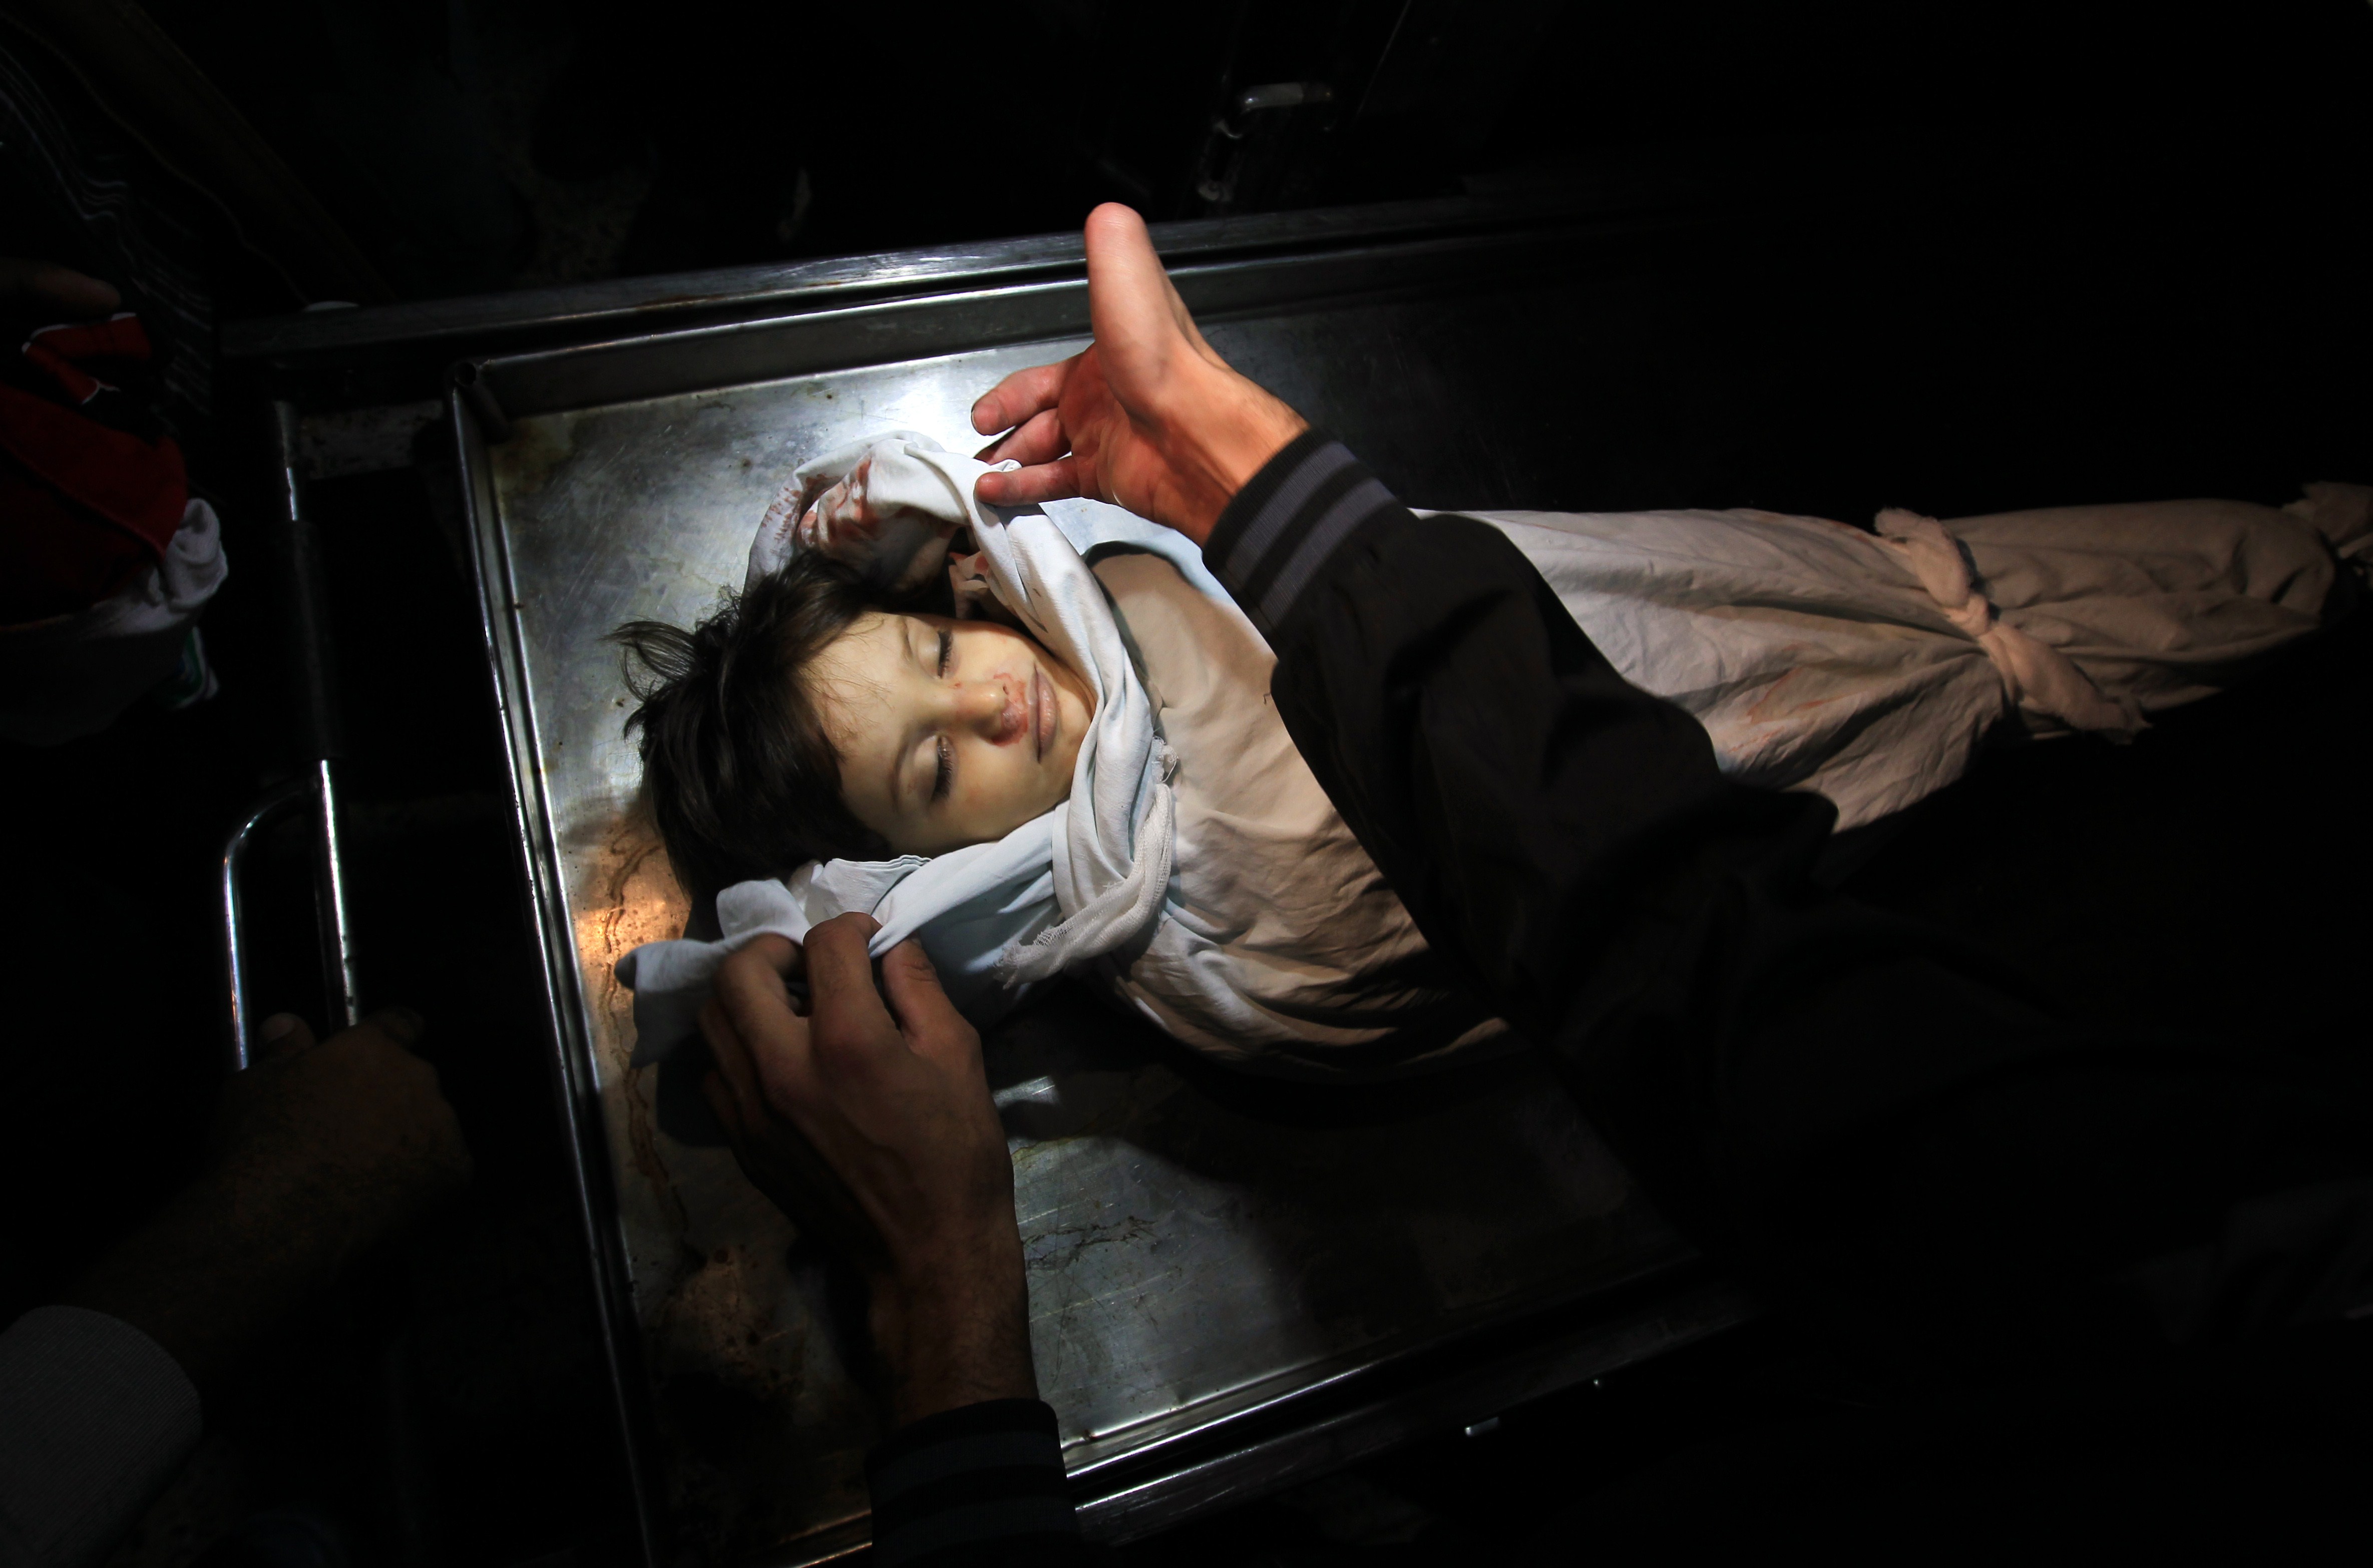 he body of Palestinian boy Abdel Rahman Majdi Naim lies in a hospital morgue after he was killed in a second Israeli strike on the building housing AFP's offices in Gaza city, according to Hamas health officials, on 21 November. (AFP PHOTO / MAHMUD HAMS)